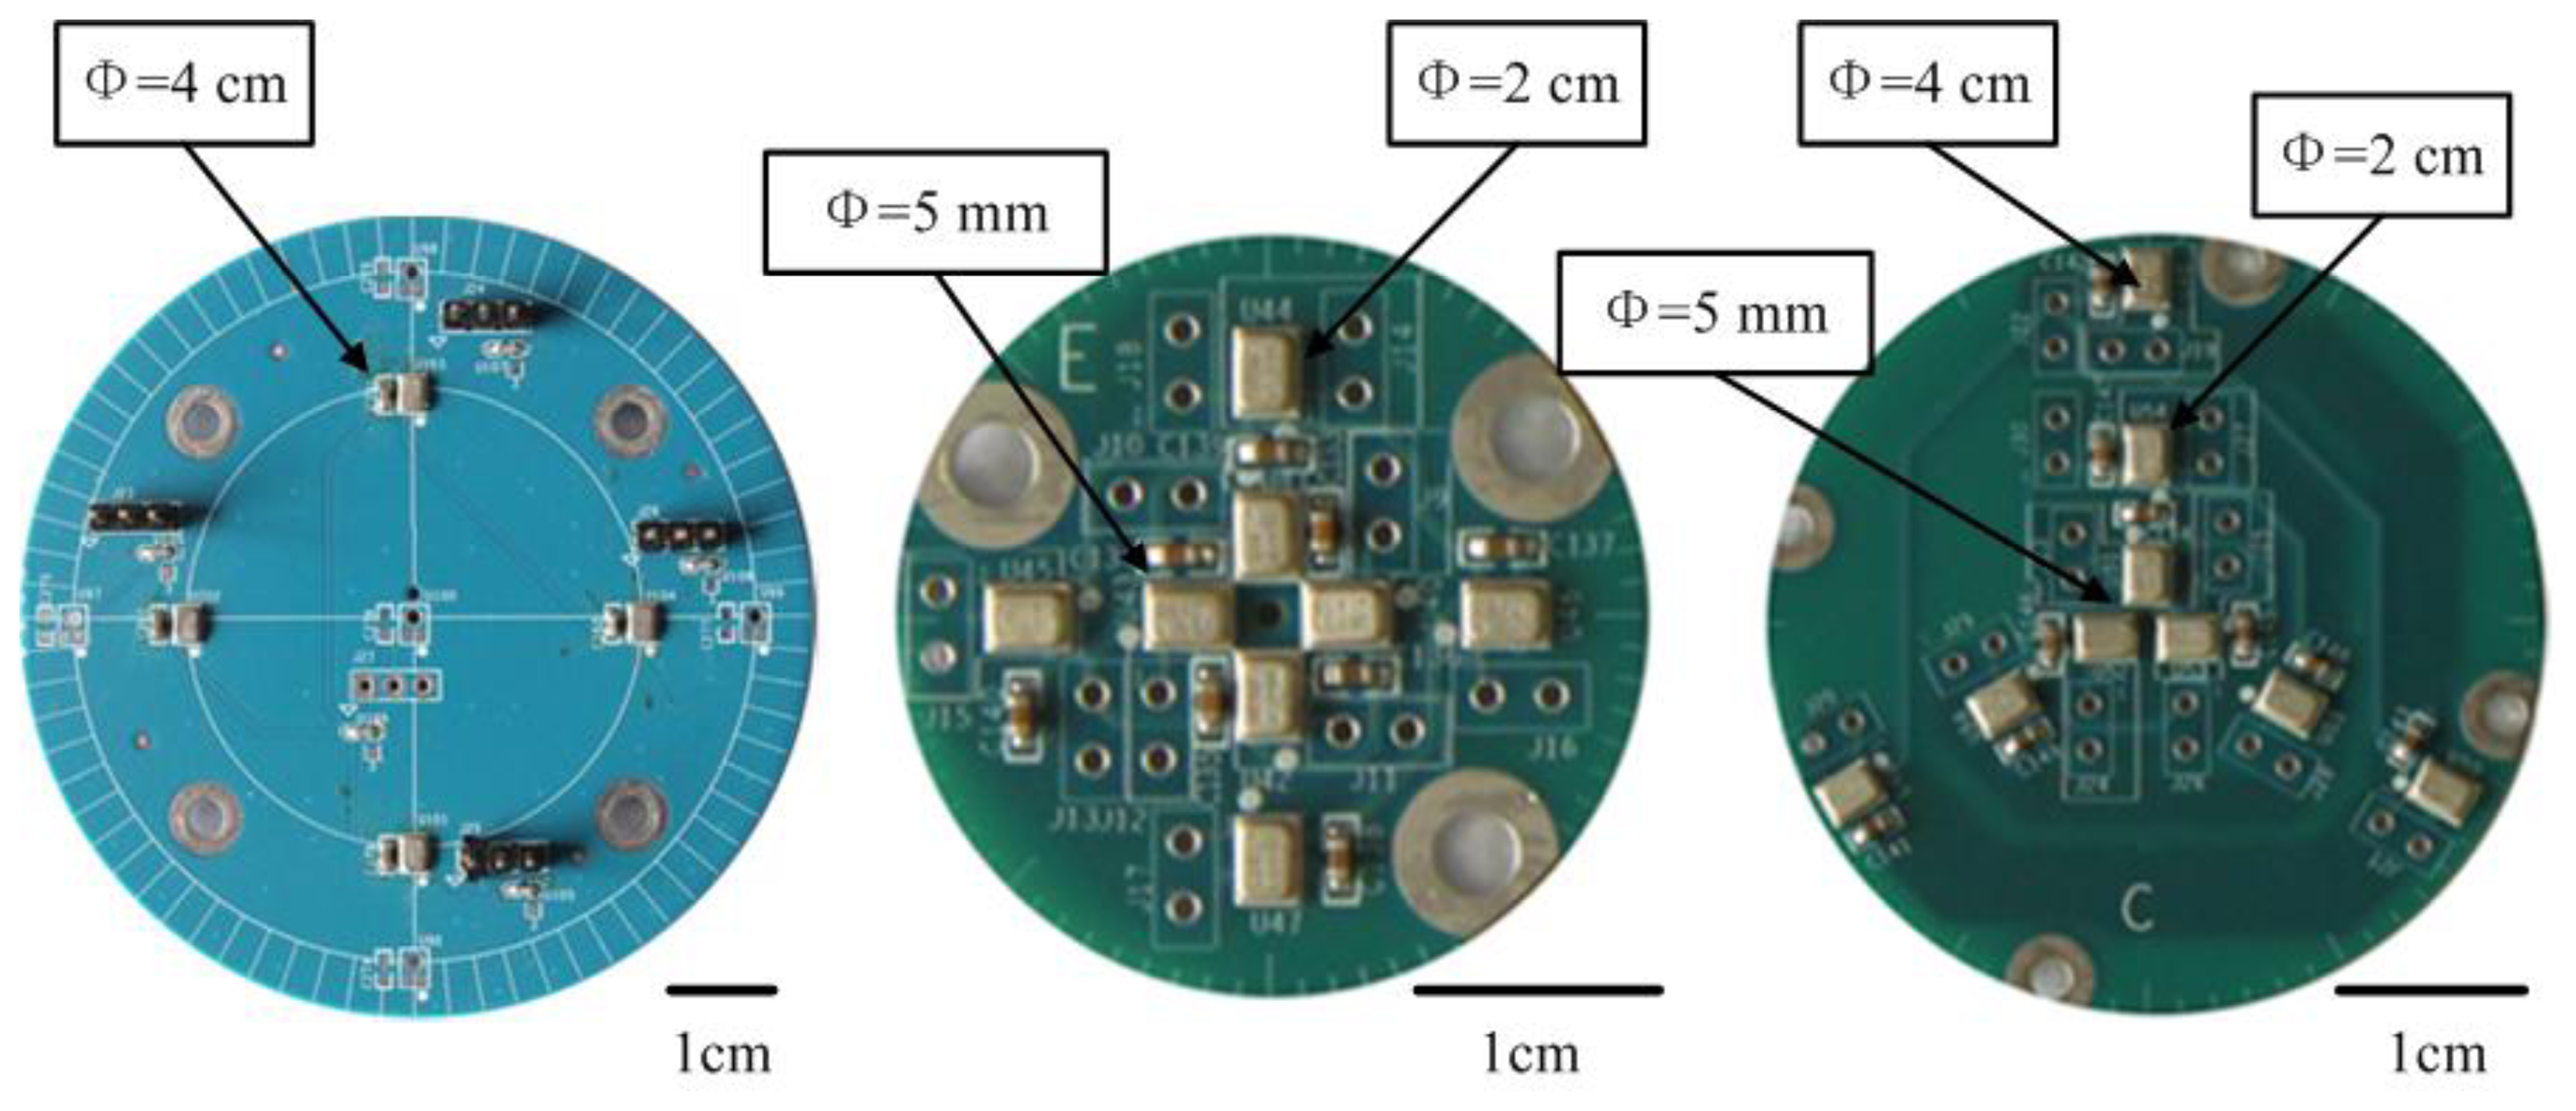 Sensors | Free Full-Text | Design of Small MEMS Microphone Array Systems  for Direction Finding of Outdoors Moving Vehicles